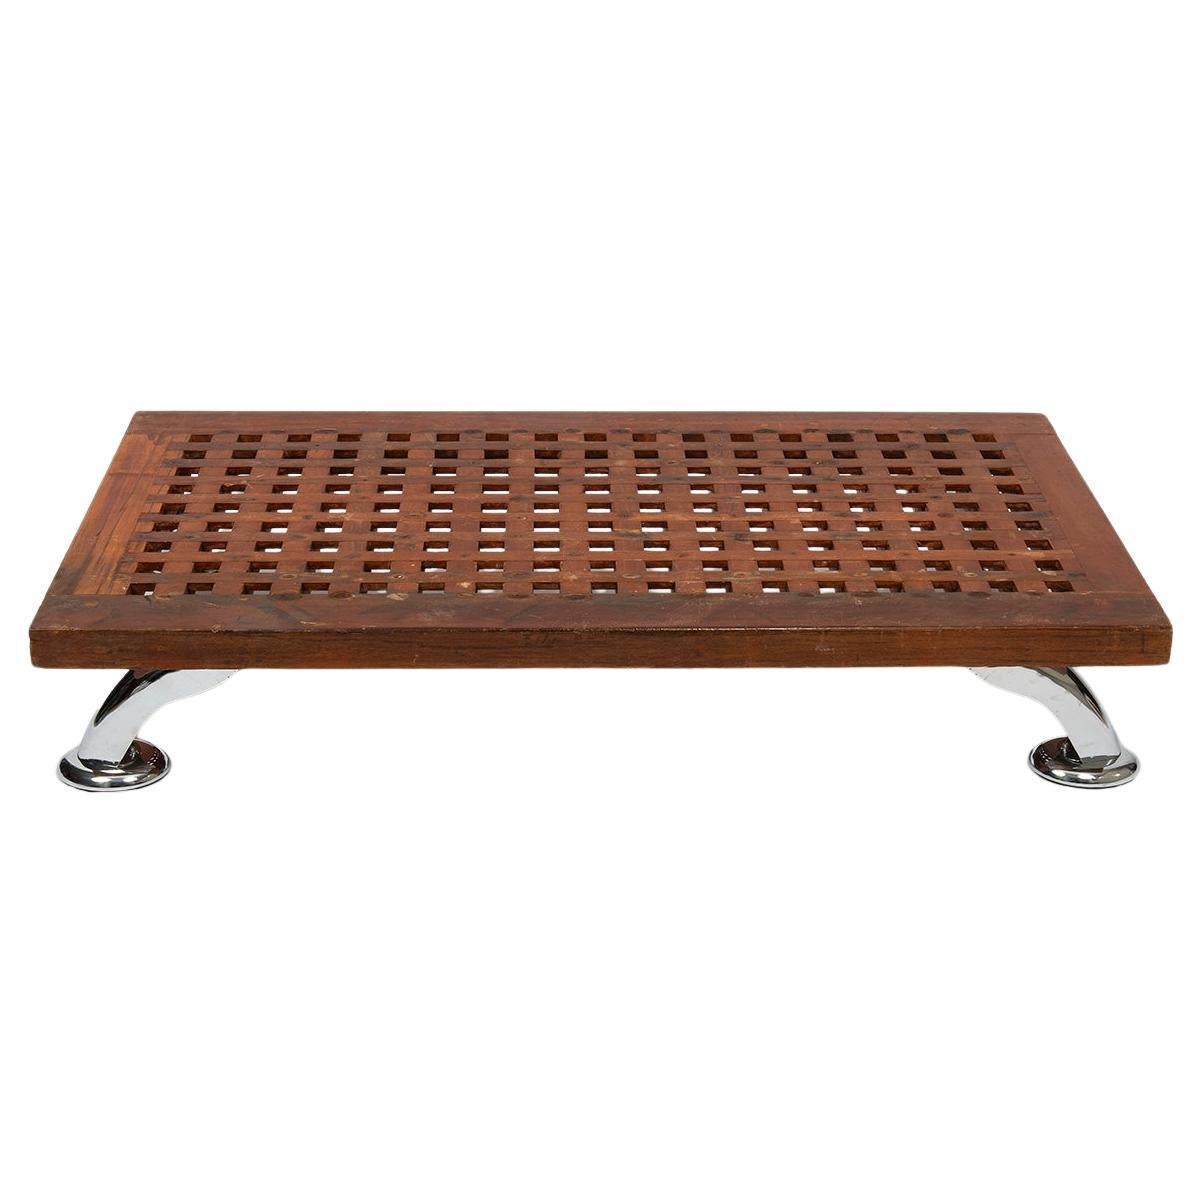 Royal Navy Ships Grating Table. Indoor or Outdoor Use. Year 1920's For Sale